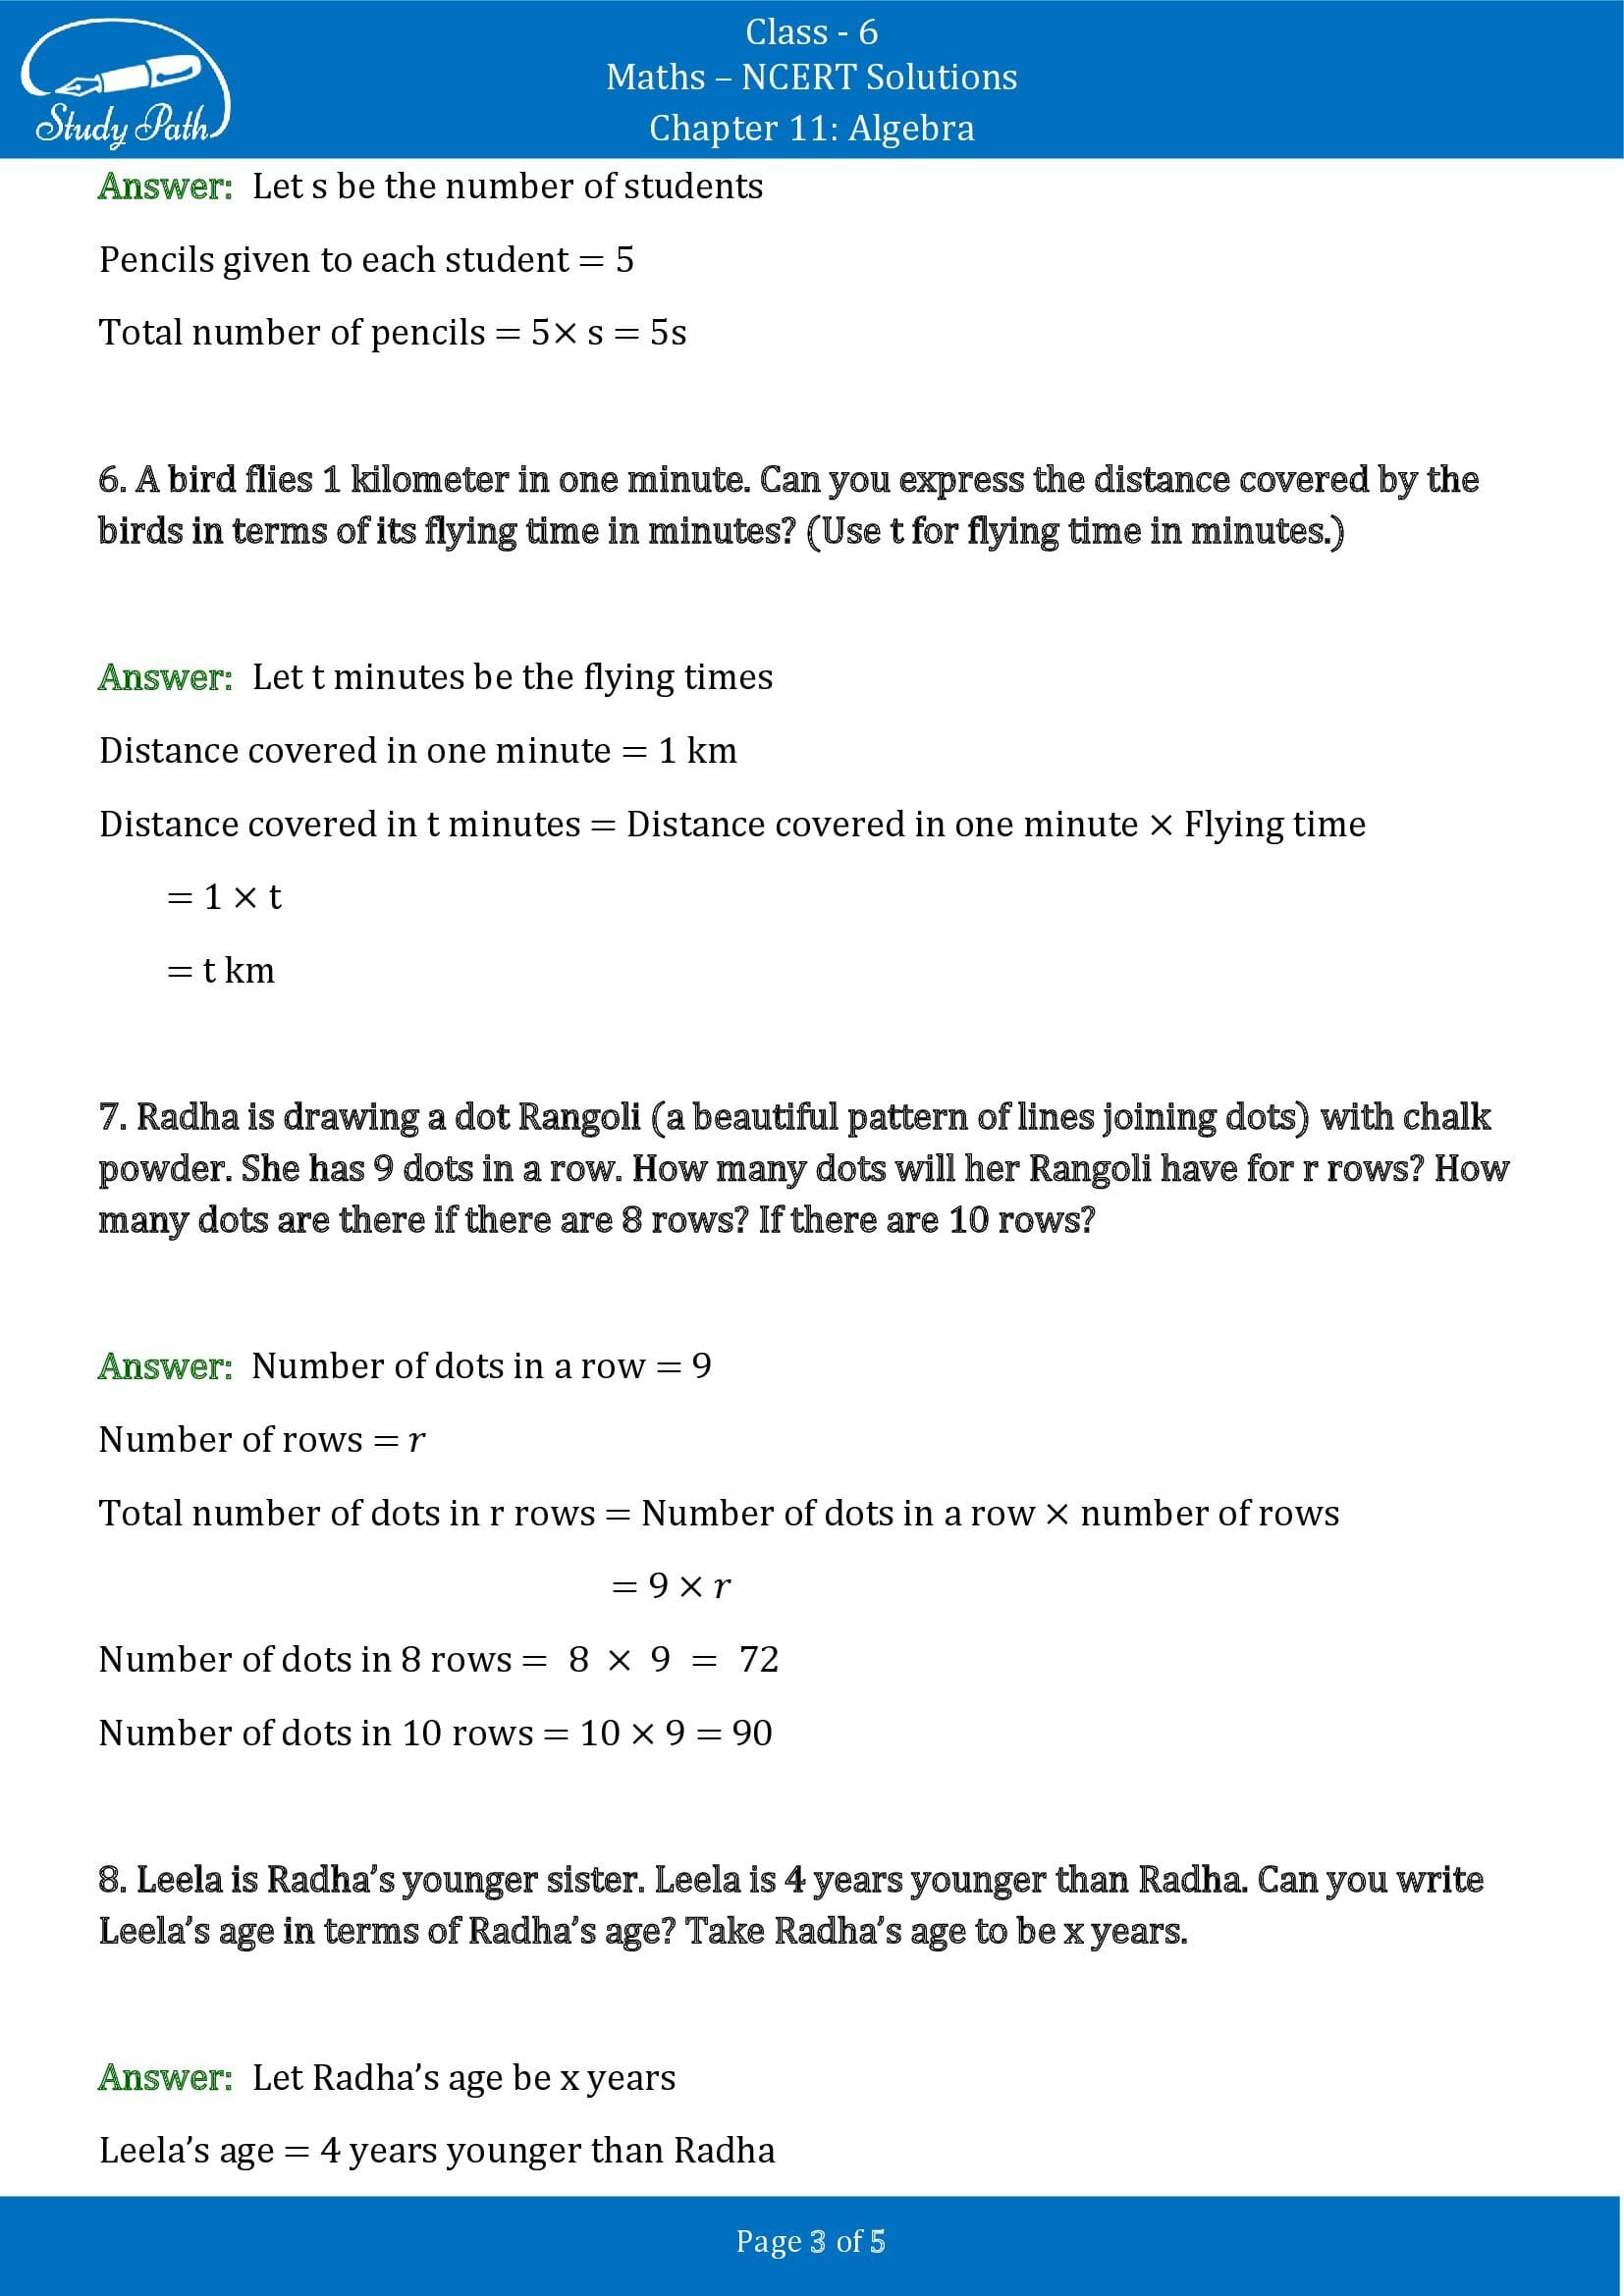 NCERT Solutions for Class 6 Maths Chapter 11 Algebra Exercise 11.1 00003